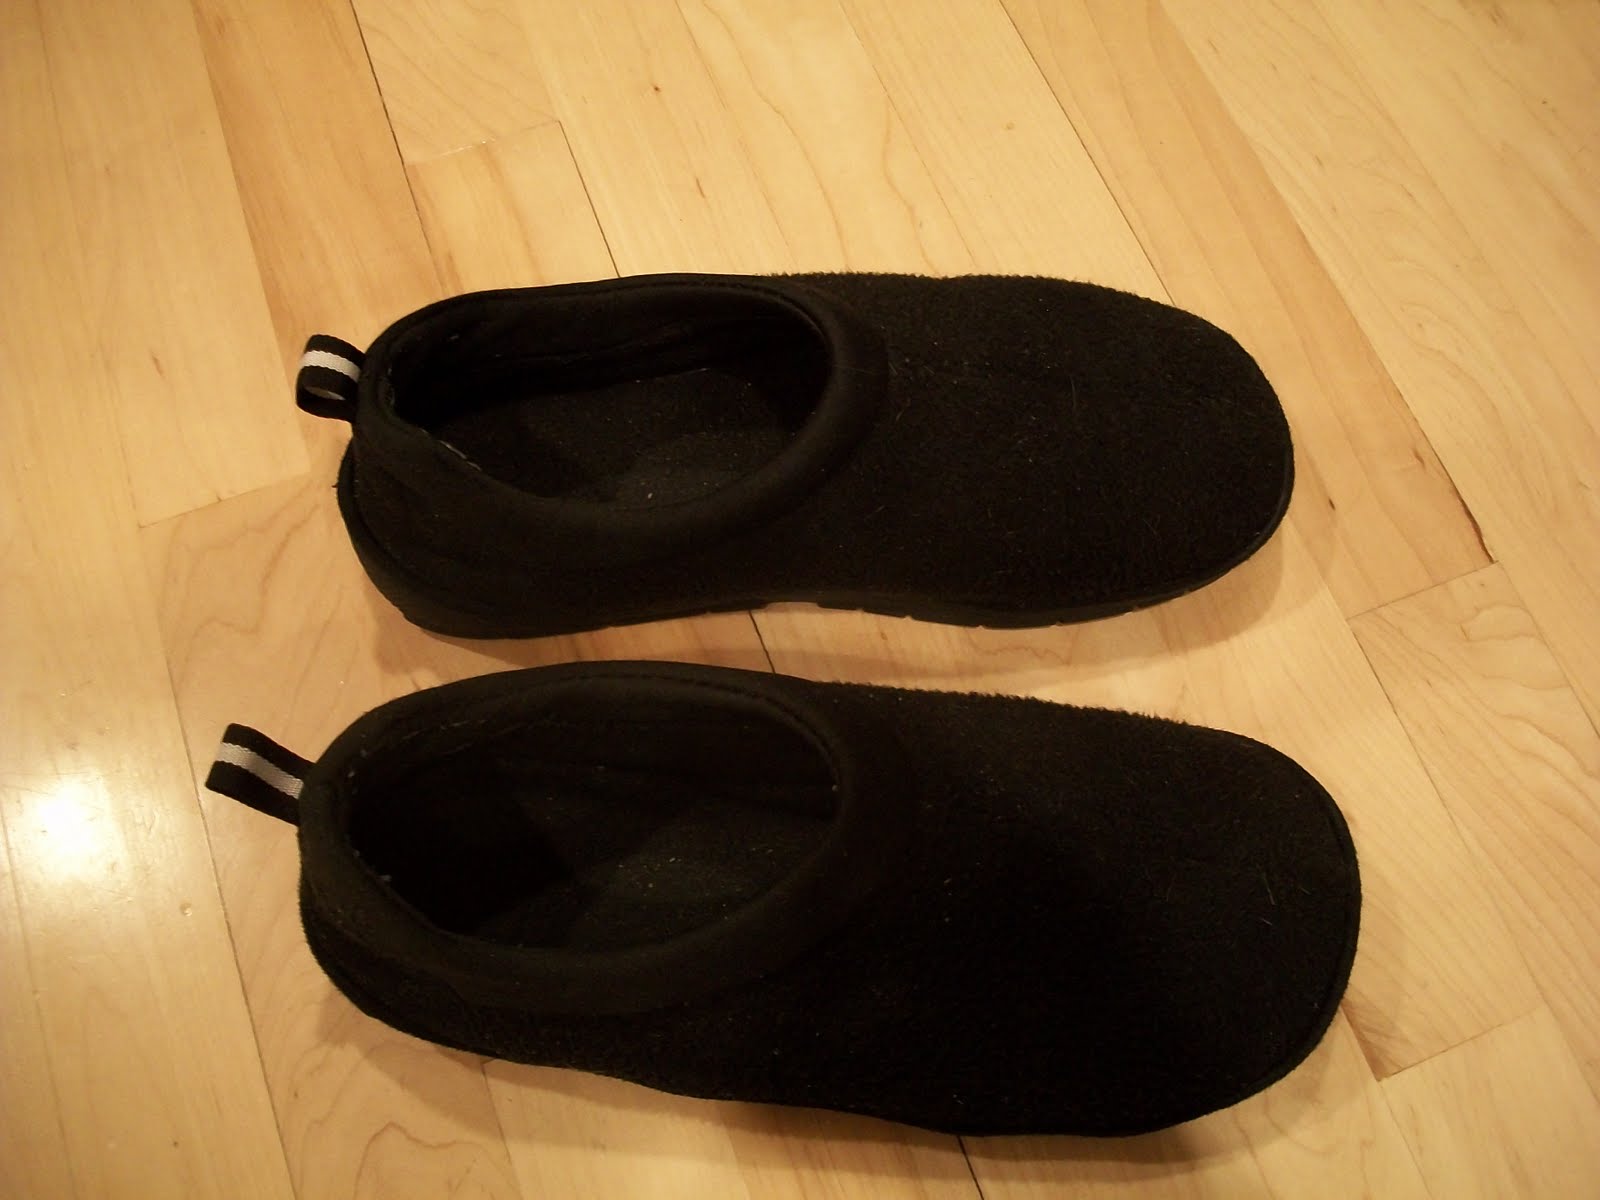 Just Happy To Be Here: Old Slippers - New Slippers